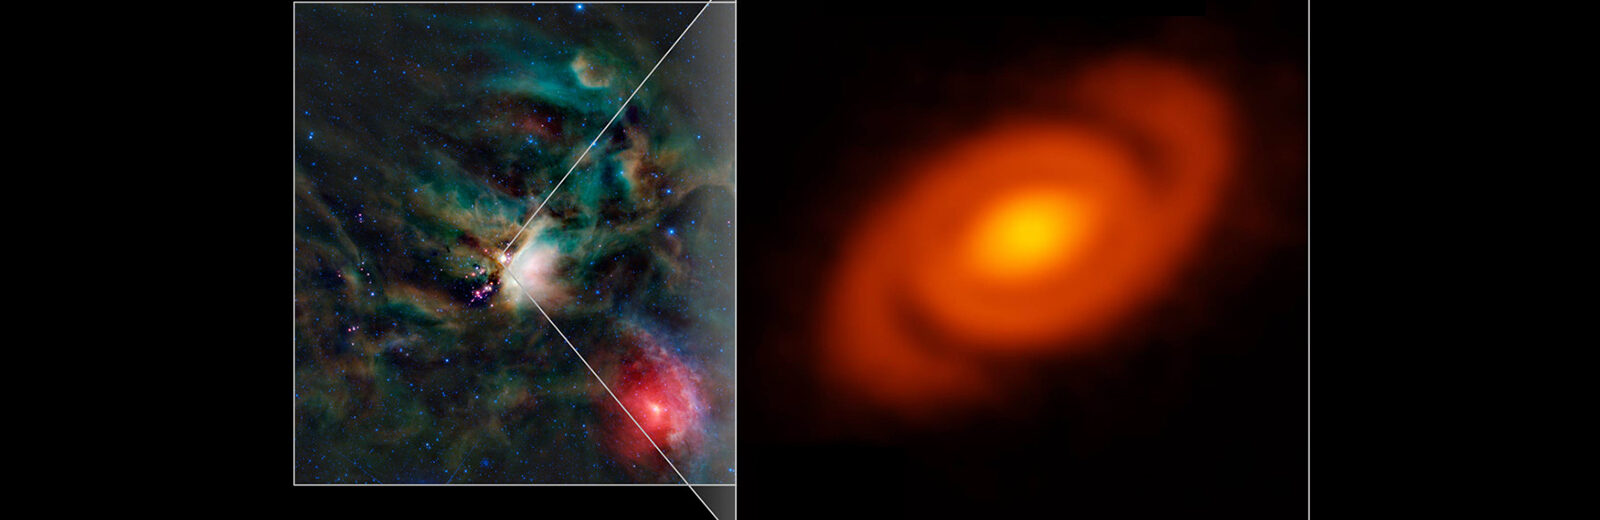 Planet-forming disk has lawn-sprinkler-like spiral arms 